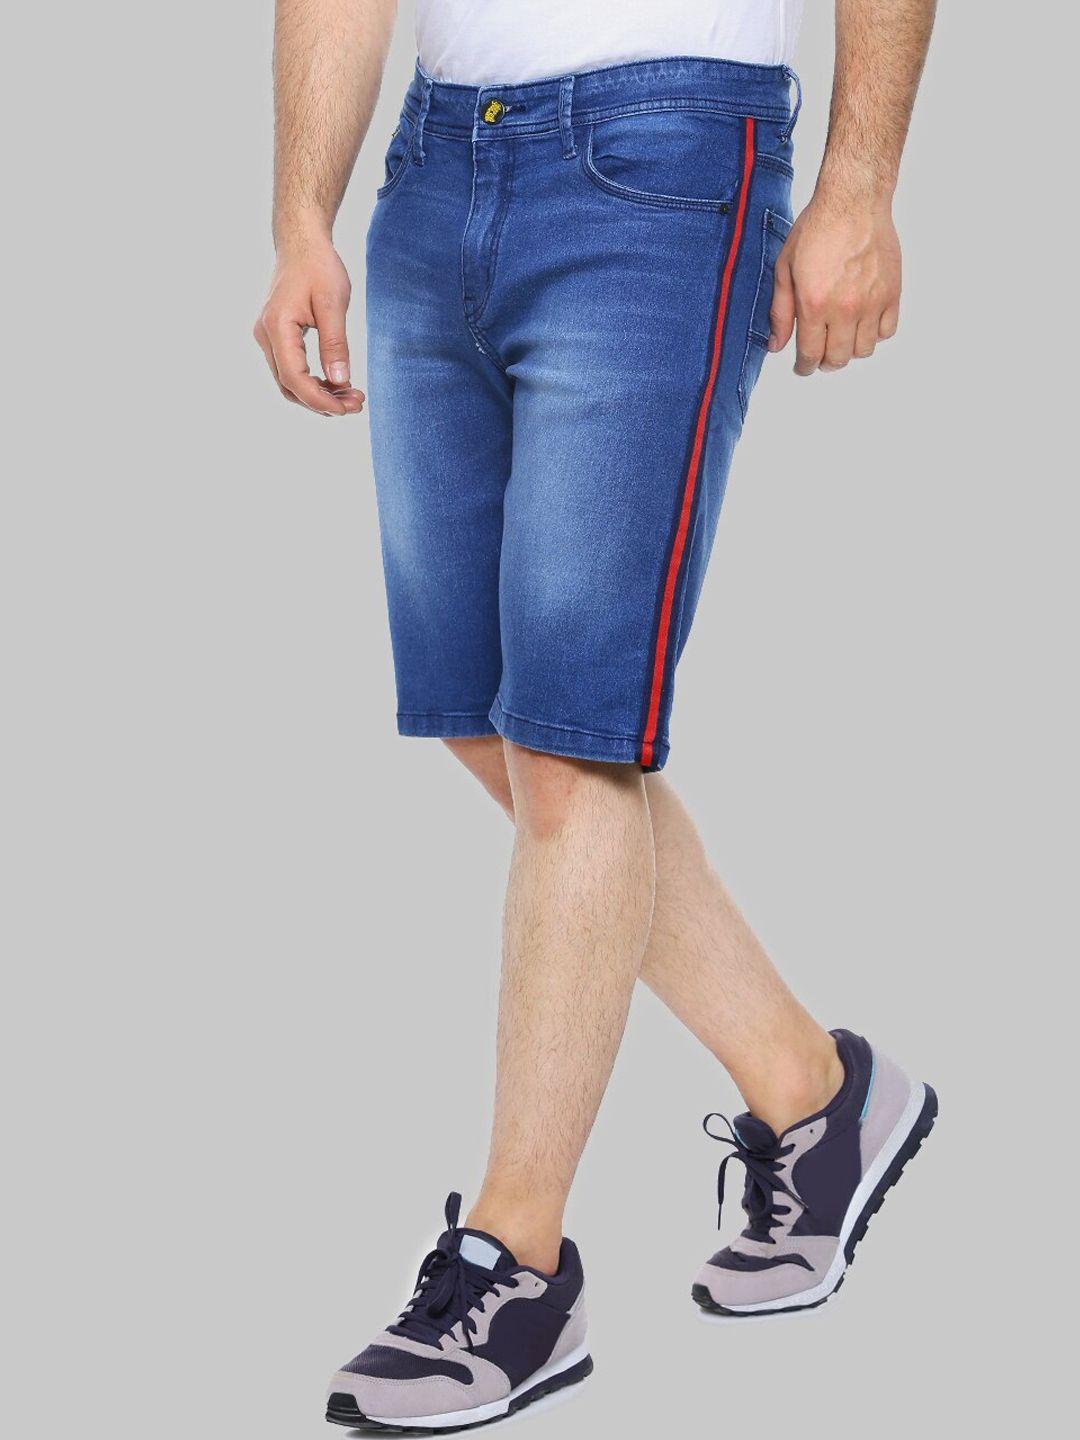 campus sutra men blue mid-rise side striped washed cotton denim shorts